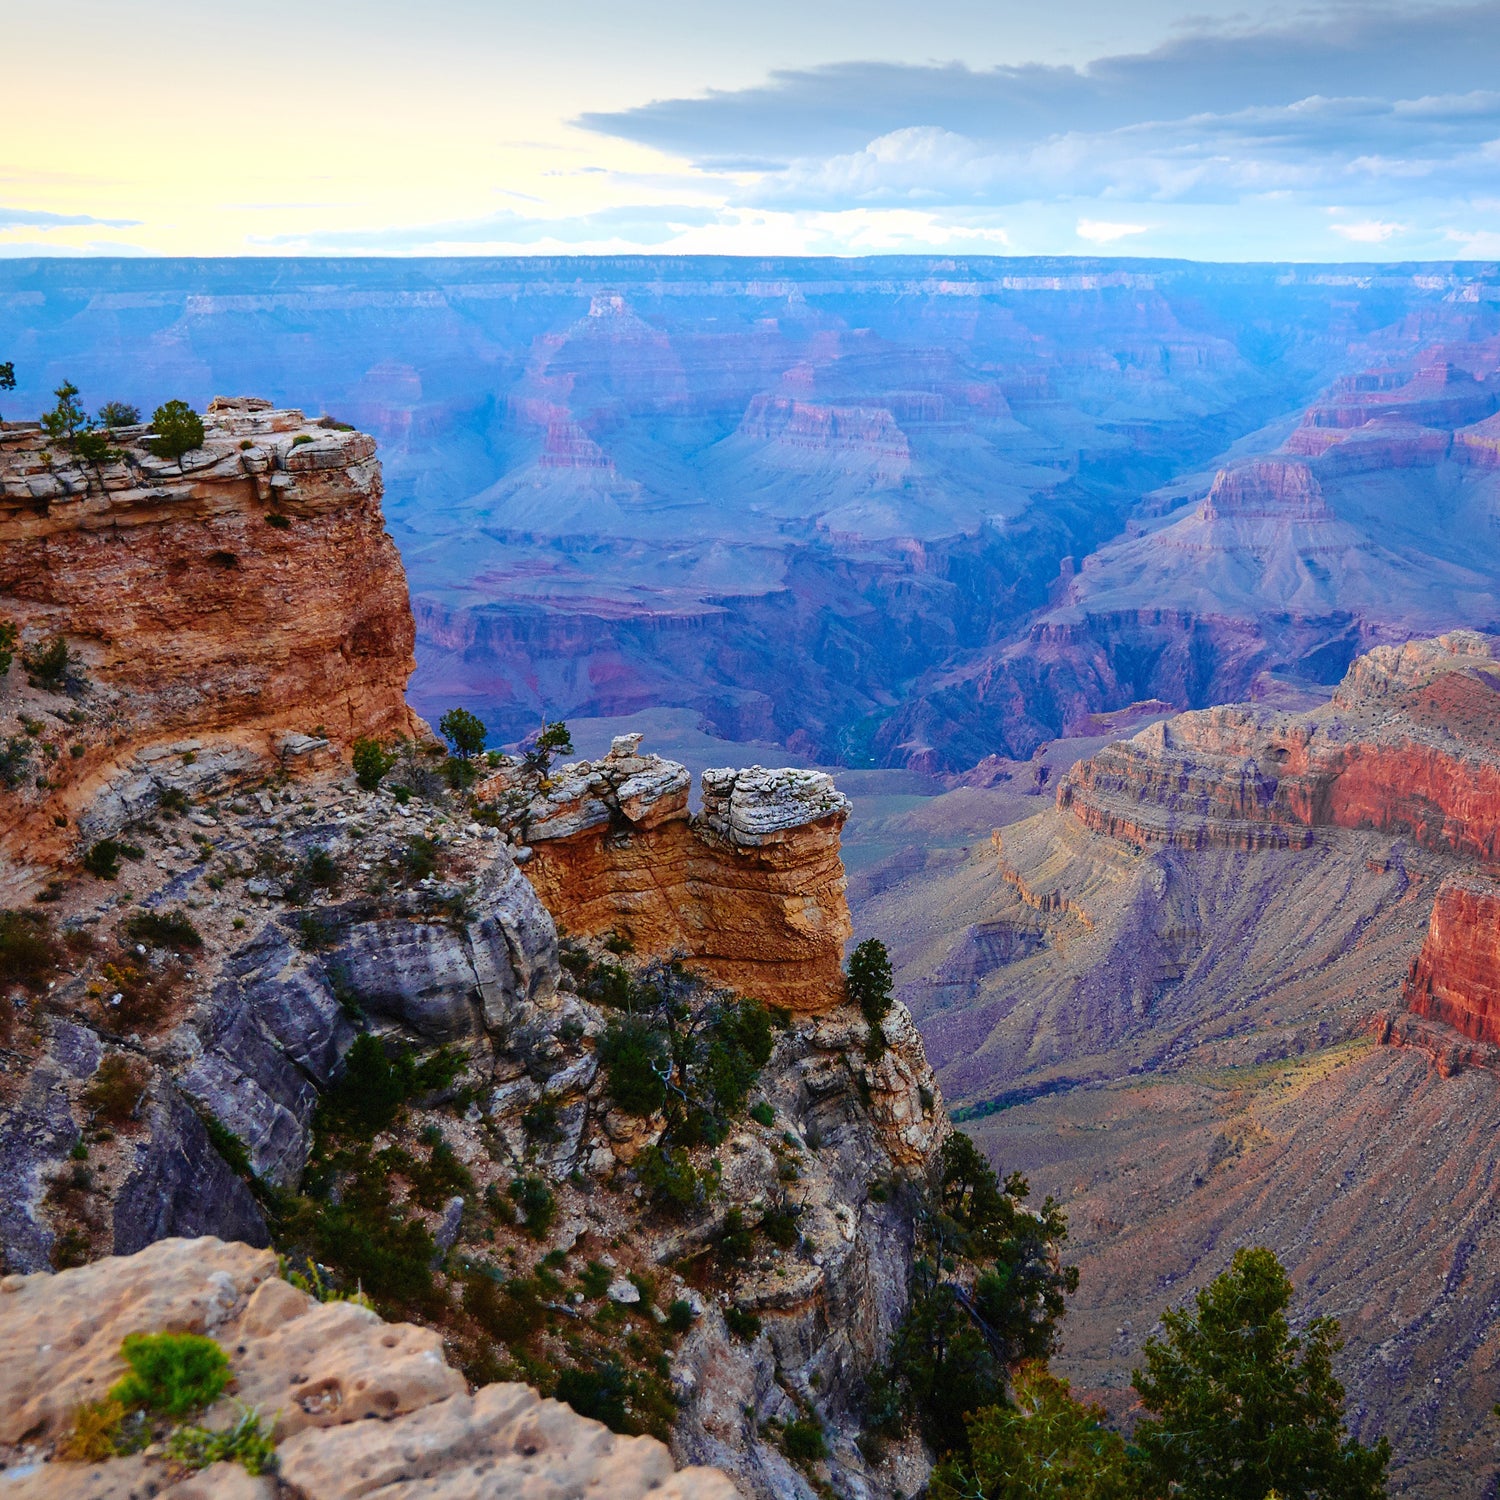 Judge Clears Way For Mining At Grand Canyon